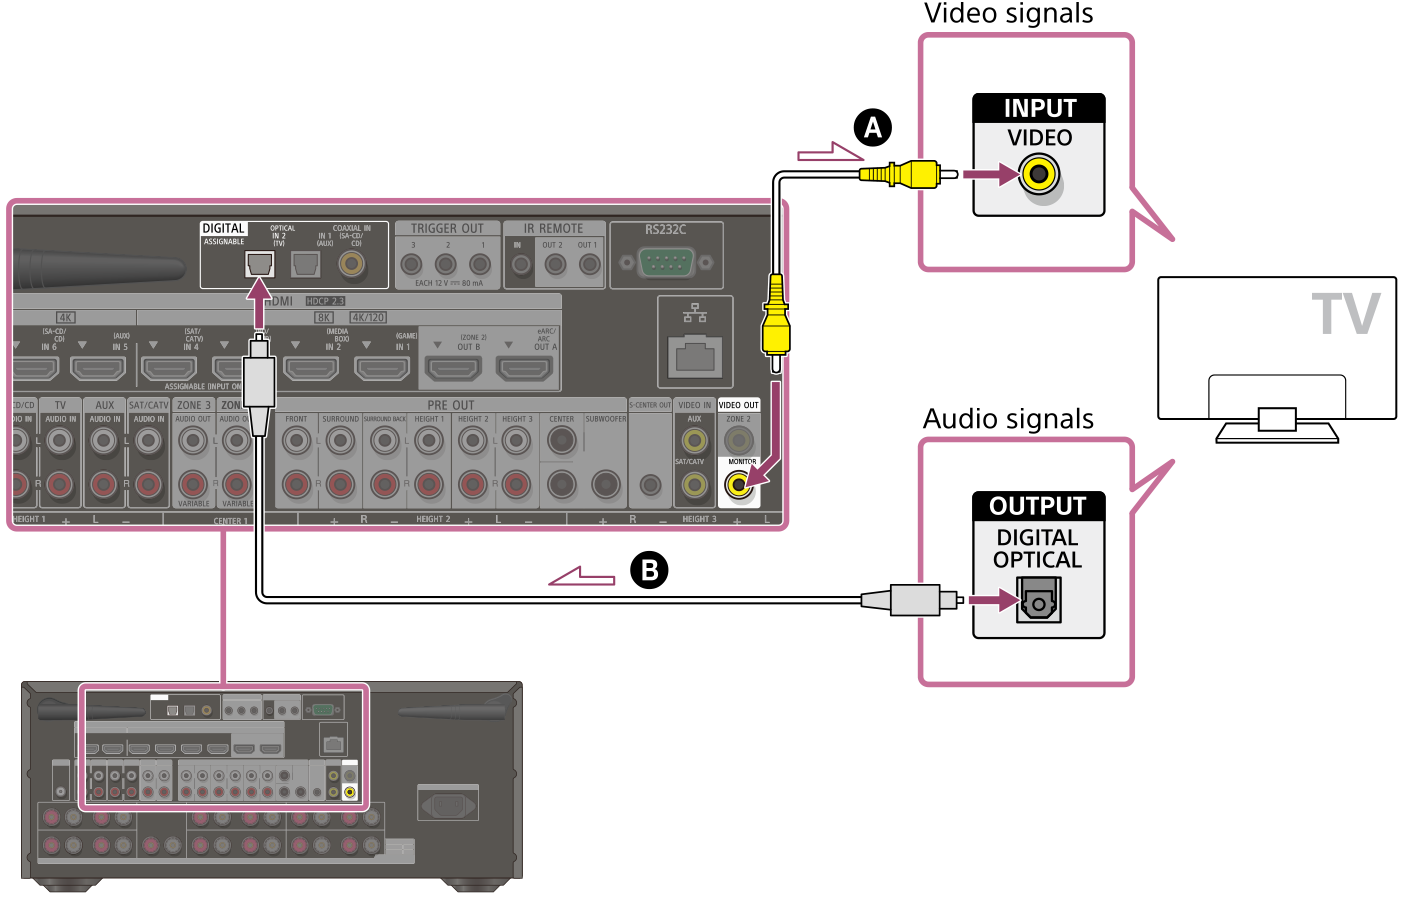 Illustration of connecting the TV and receiver. Connect the VIDEO OUT MONITOR jack on the rear of the receiver with the VIDEO INPUT jack on your TV using a video cable (not supplied). Connect the DIGITAL OPTICAL IN 2 (TV) jack on the rear of the receiver with the DIGITAL OPTICAL OUTPUT jack on the rear of your TV using an optical digital cable (not supplied).